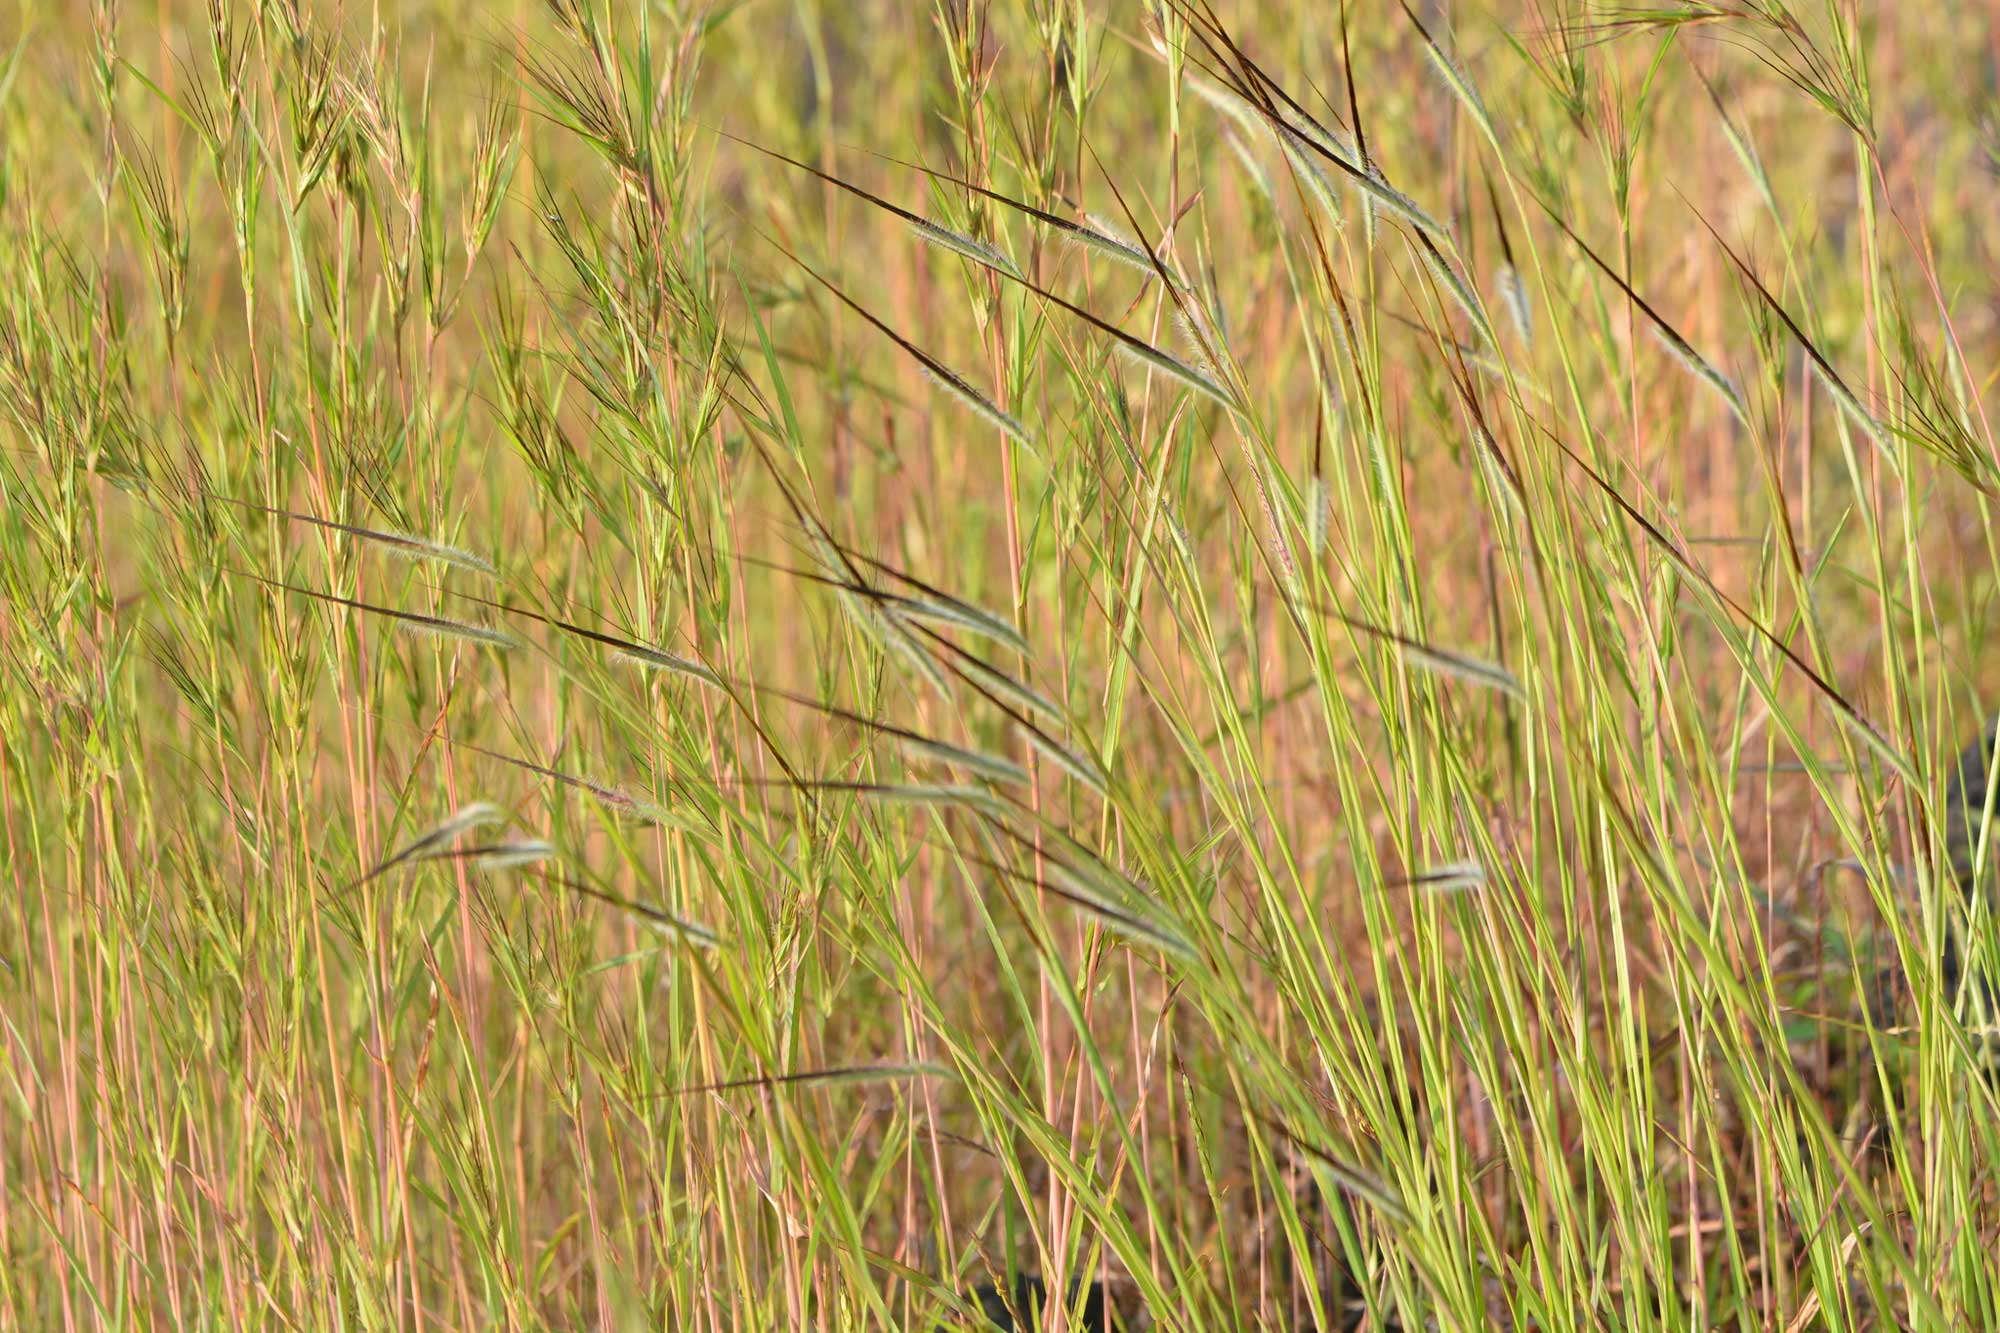 Photograph of tanglehead growing in Maharashtra, India. The photo shows grasses with black, pointed inflorescence angled up and to the side.